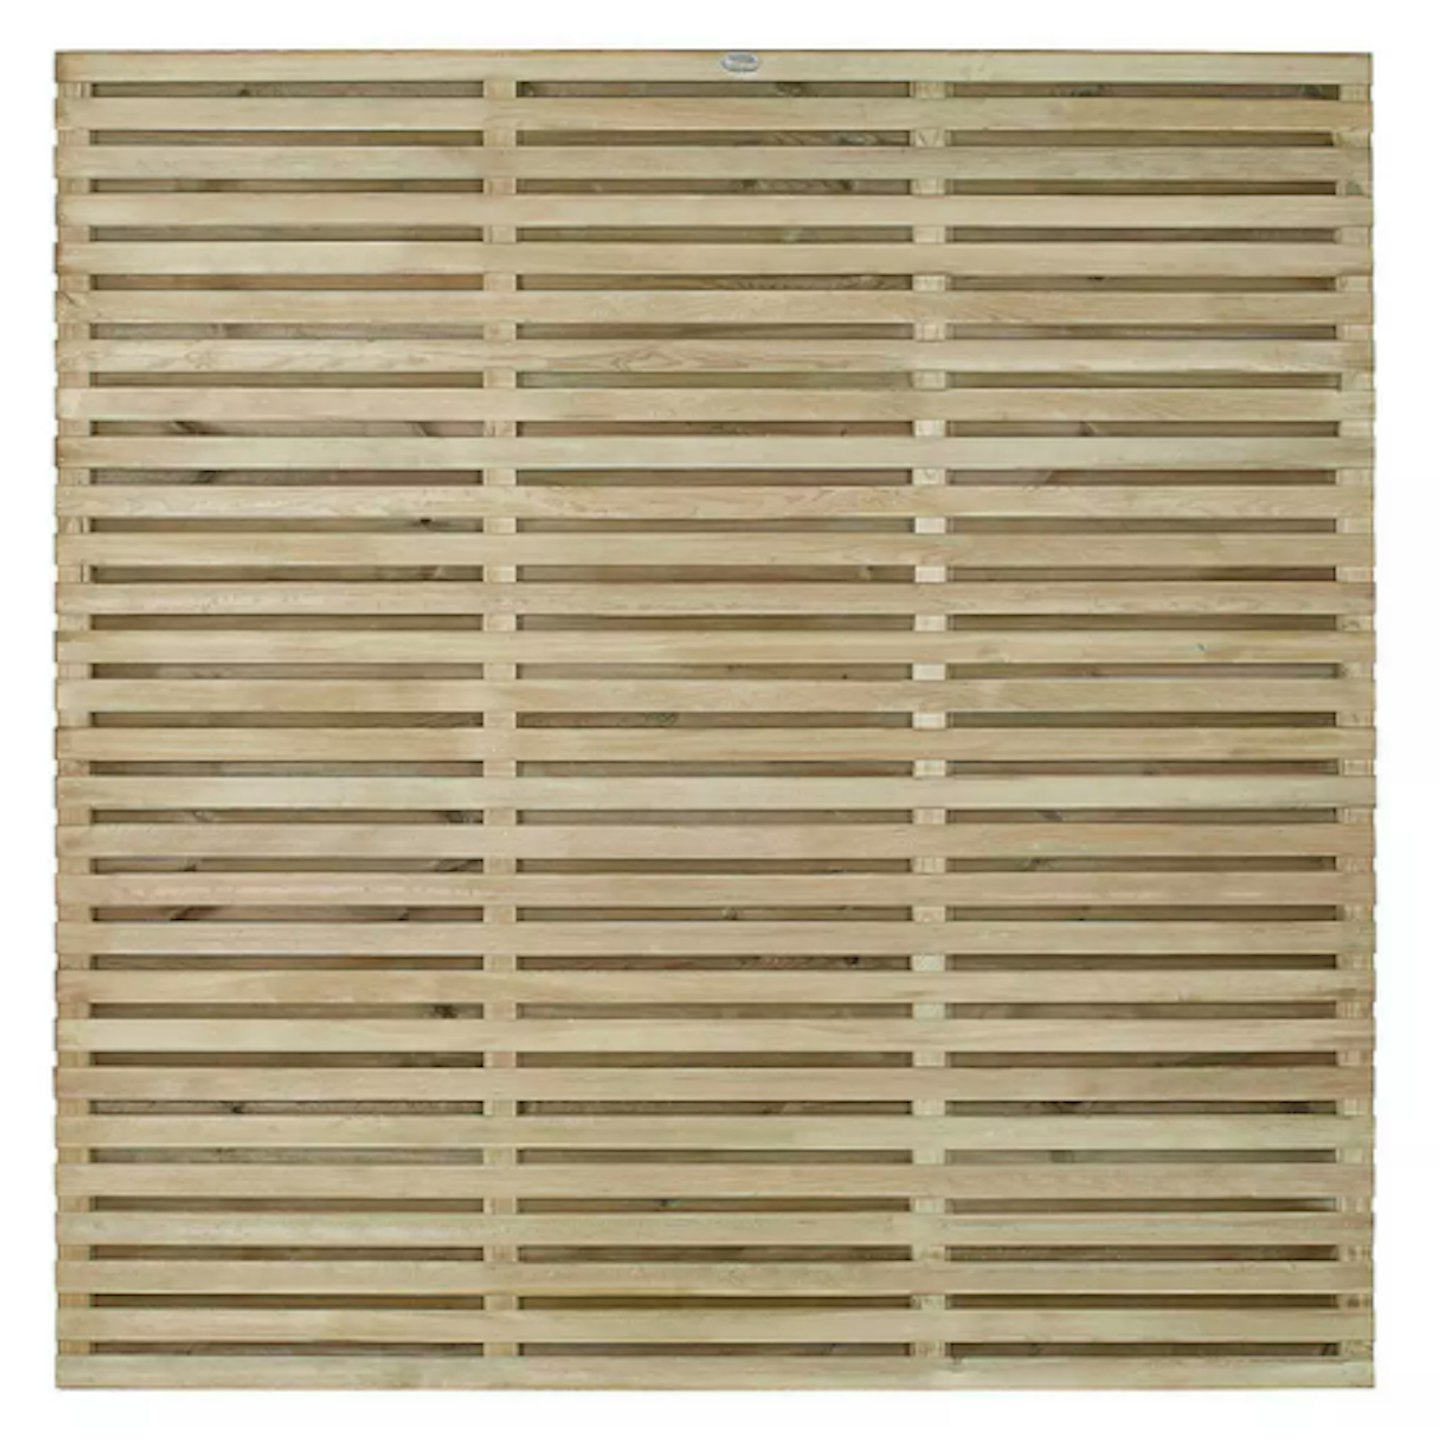 Forest Garden 6x6 Double Slatted Panel x 3